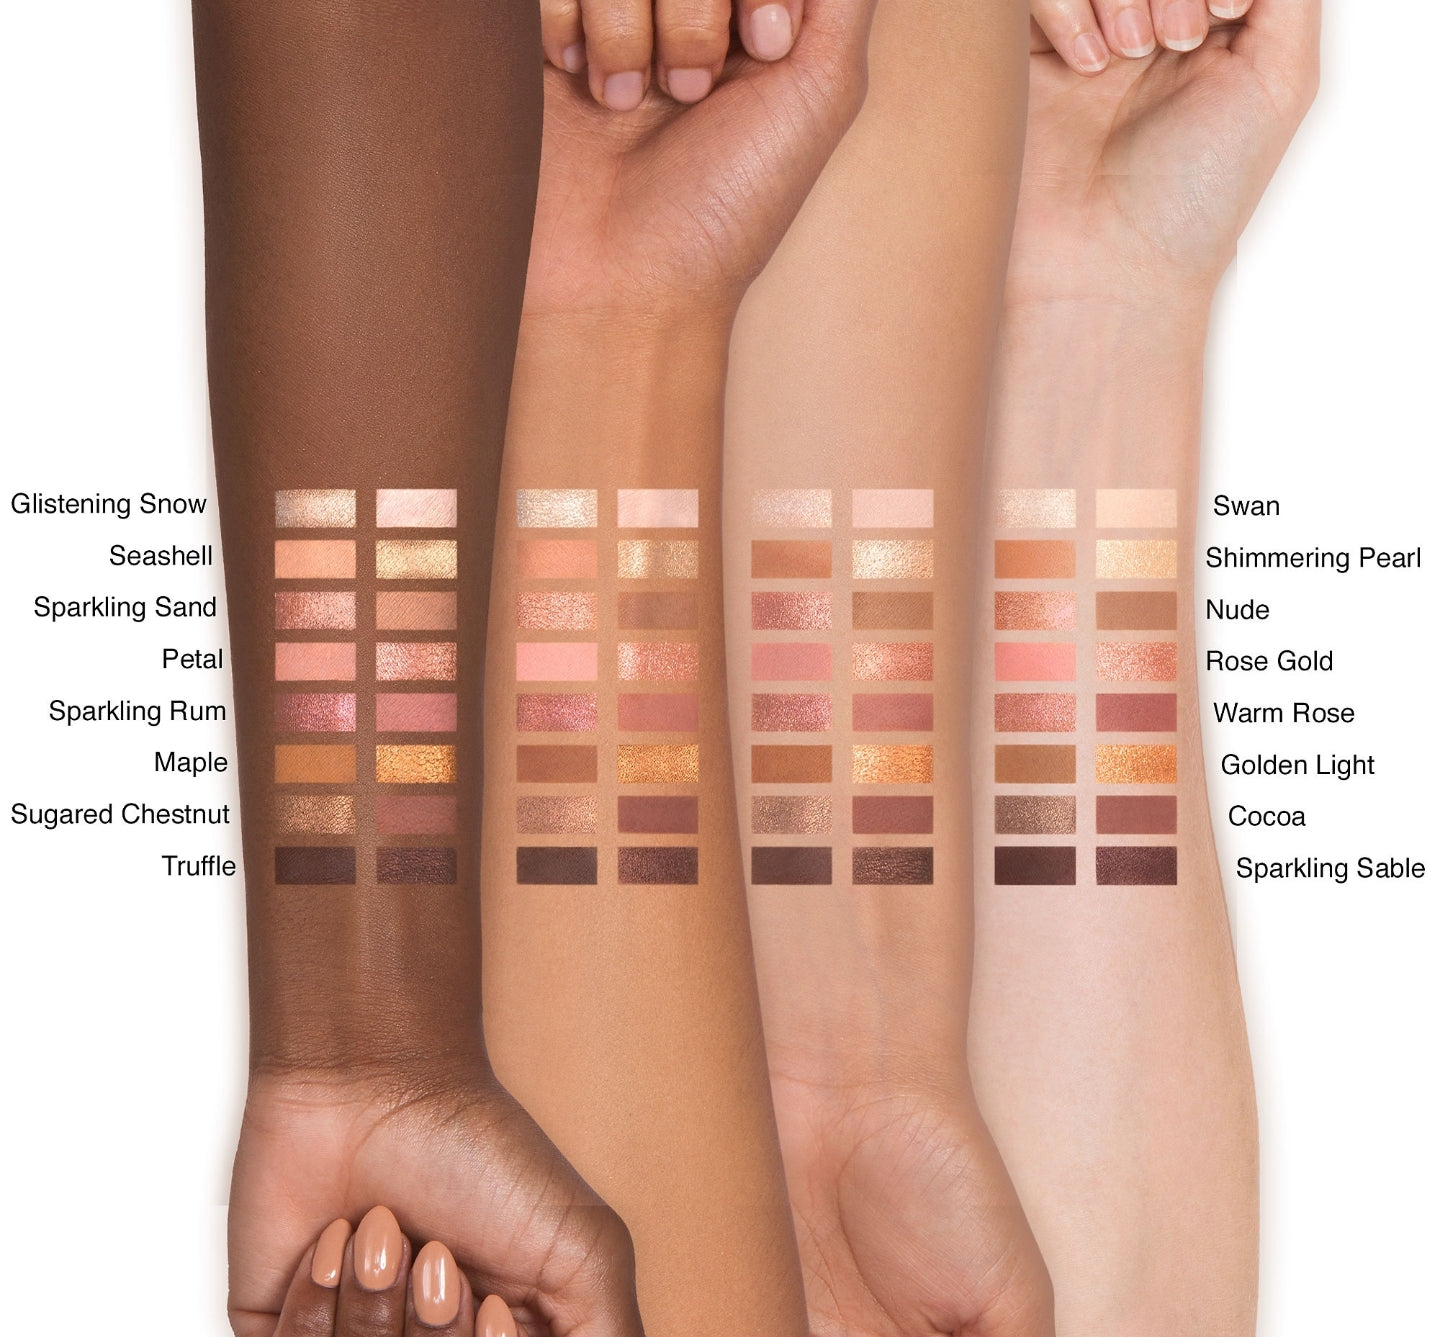 The natural nudes - born this way eyeshadow palette